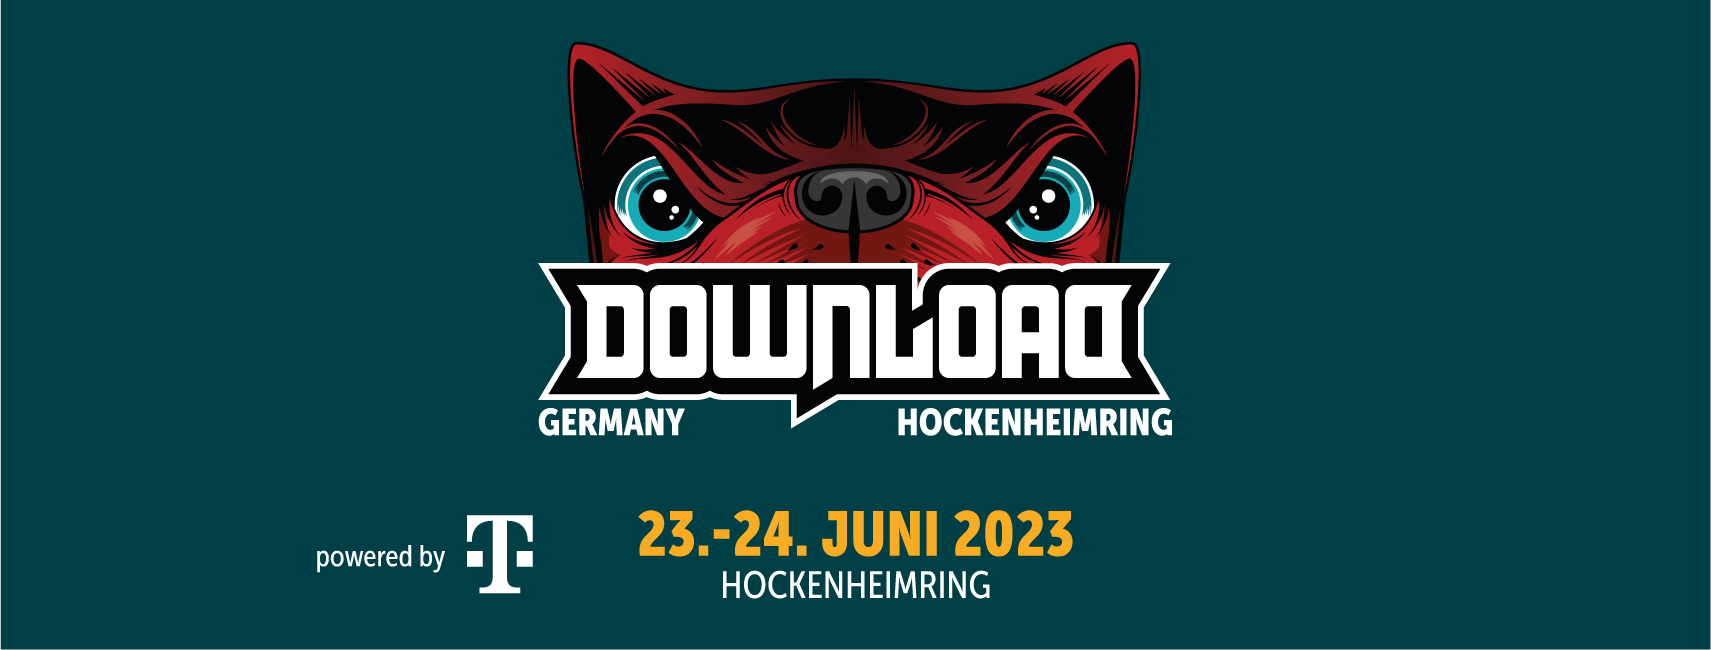 Download Festival Germany